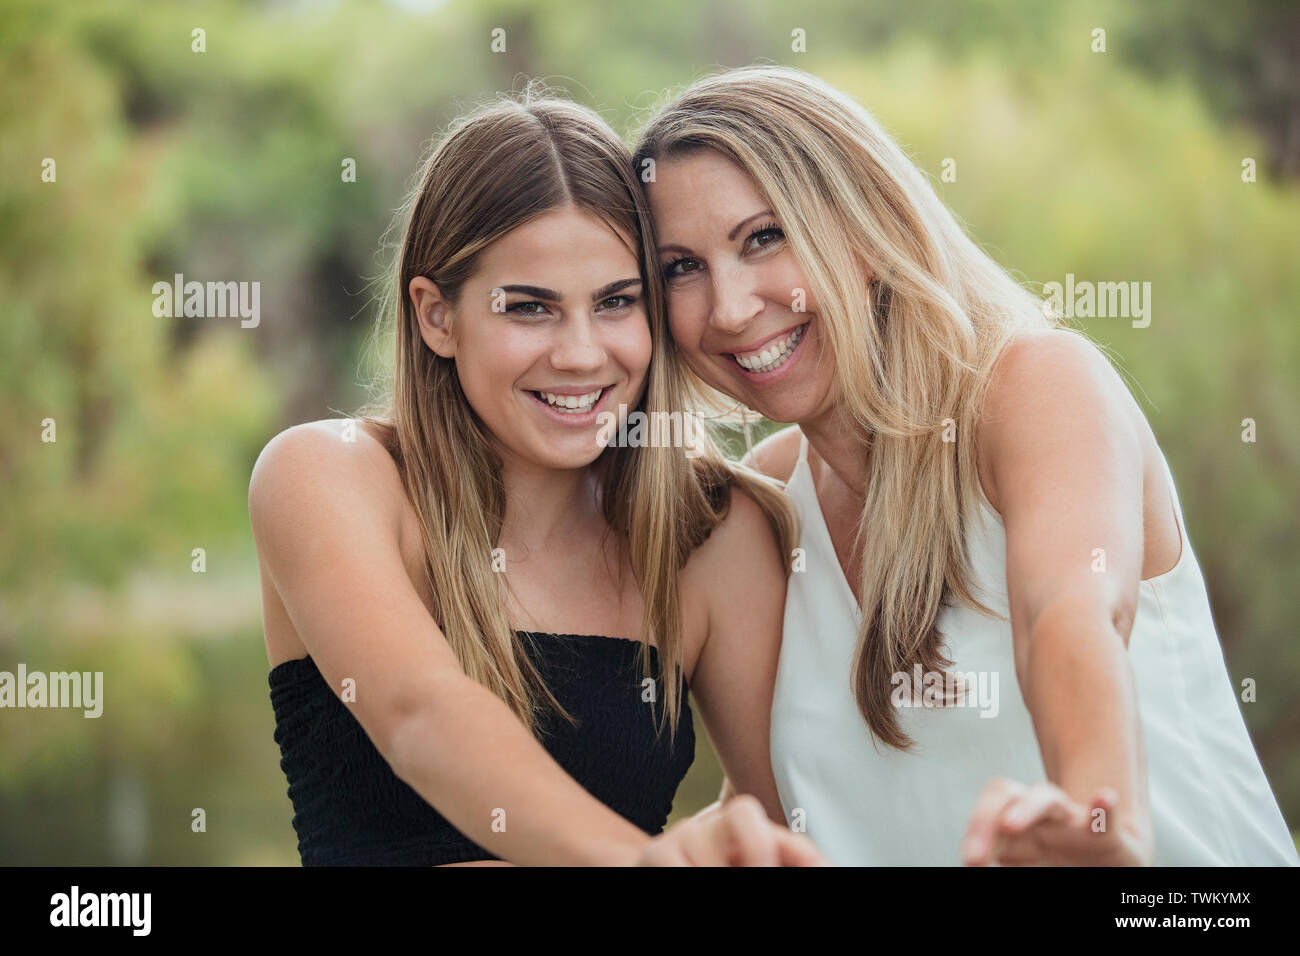 A beautiful mother and her daughter and standing side by side outdoors, laughing together and looking carefree. Stock Photo